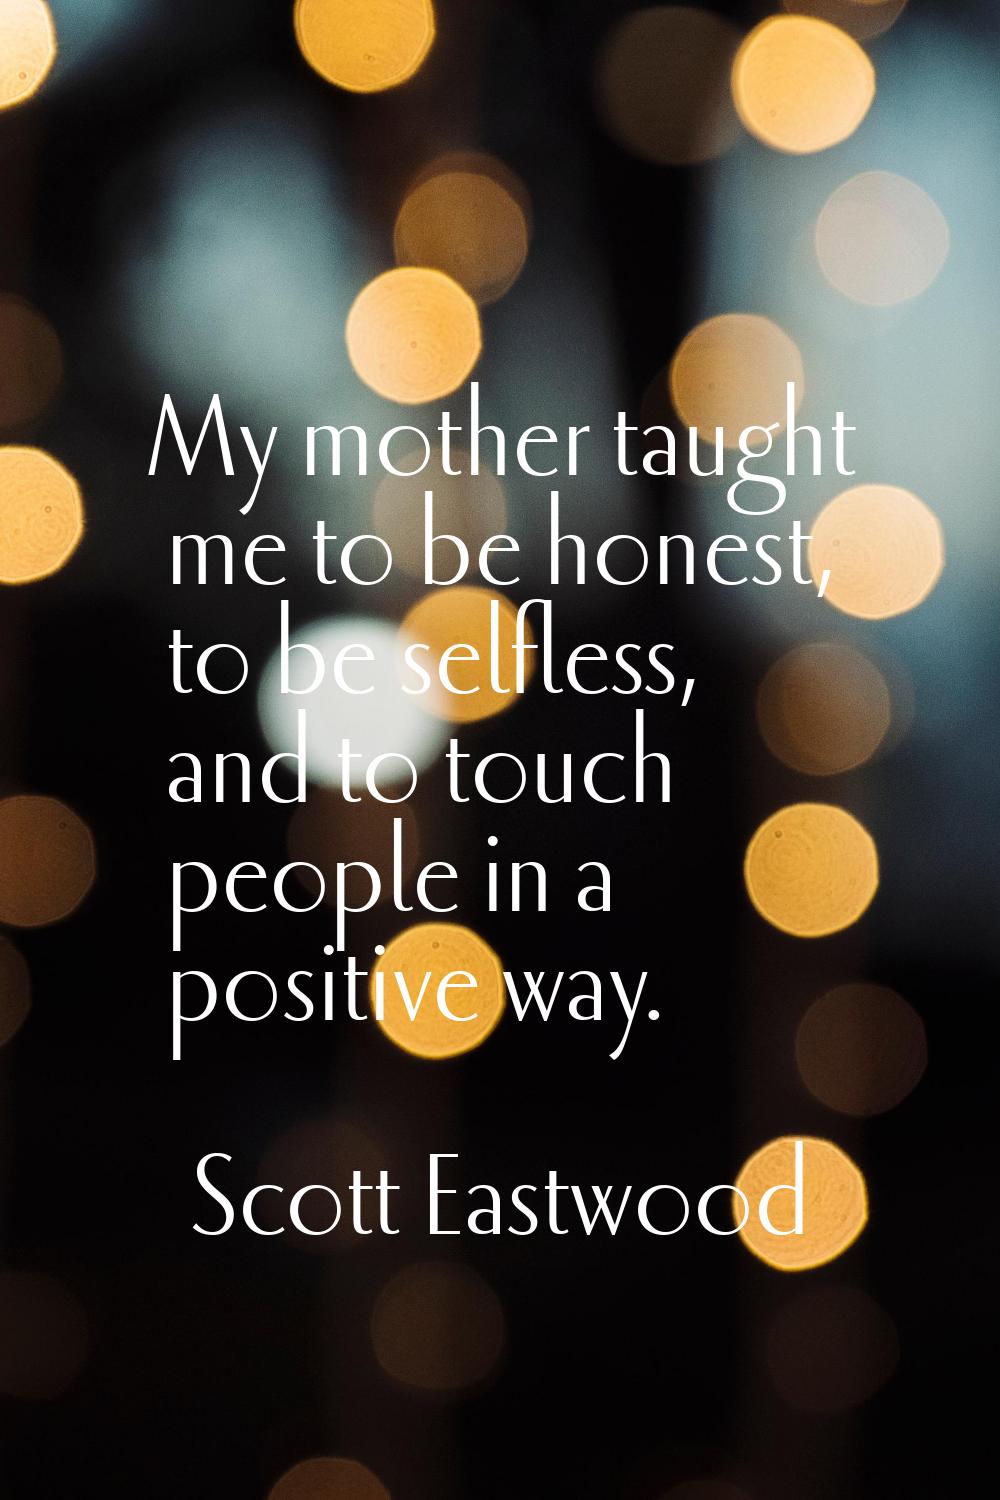 My mother taught me to be honest, to be selfless, and to touch people in a positive way.